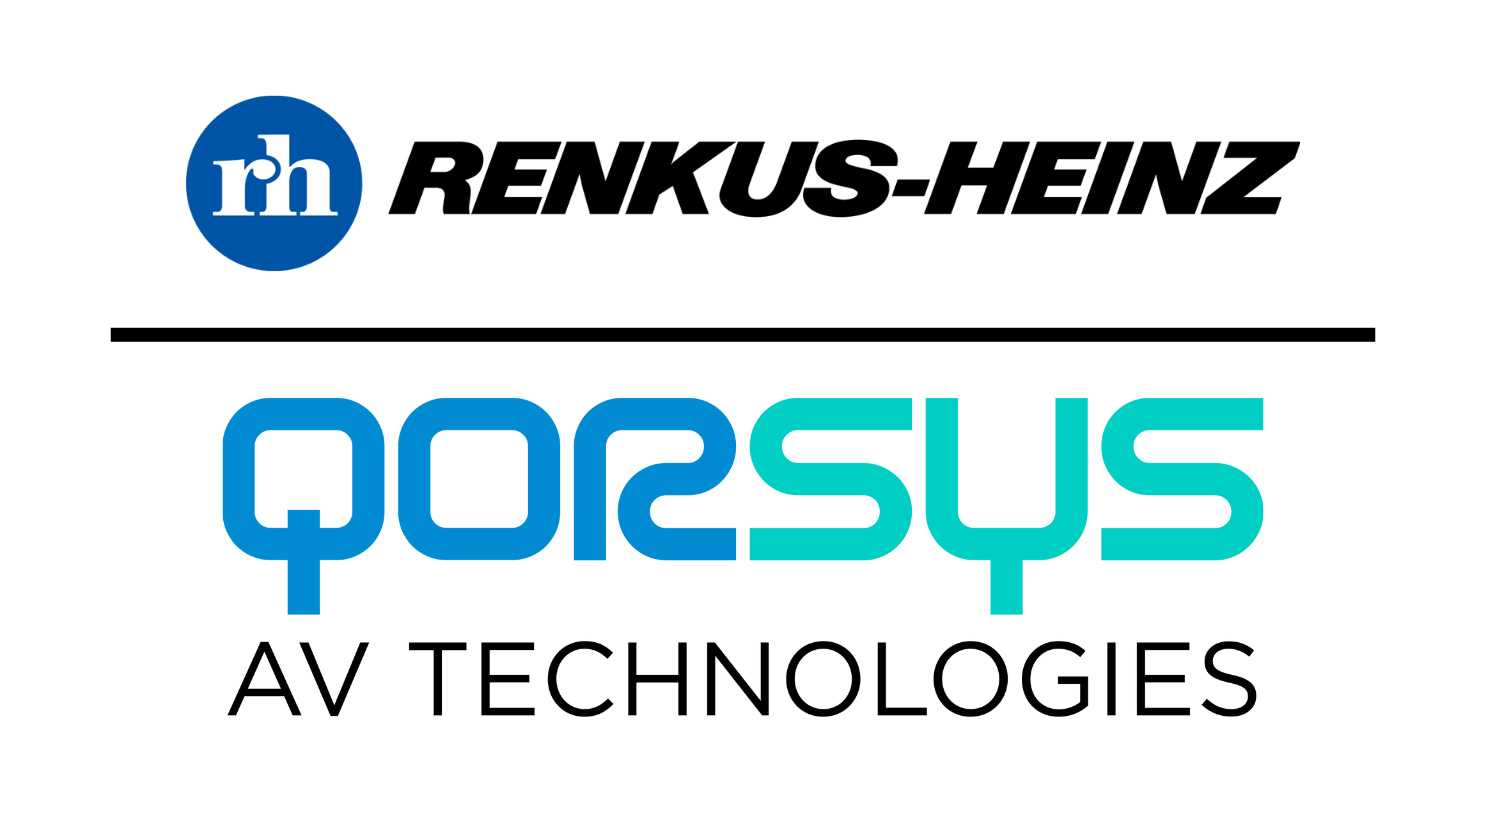 ‘The Qorsys - Renkus-Heinz partnership is a natural fit’